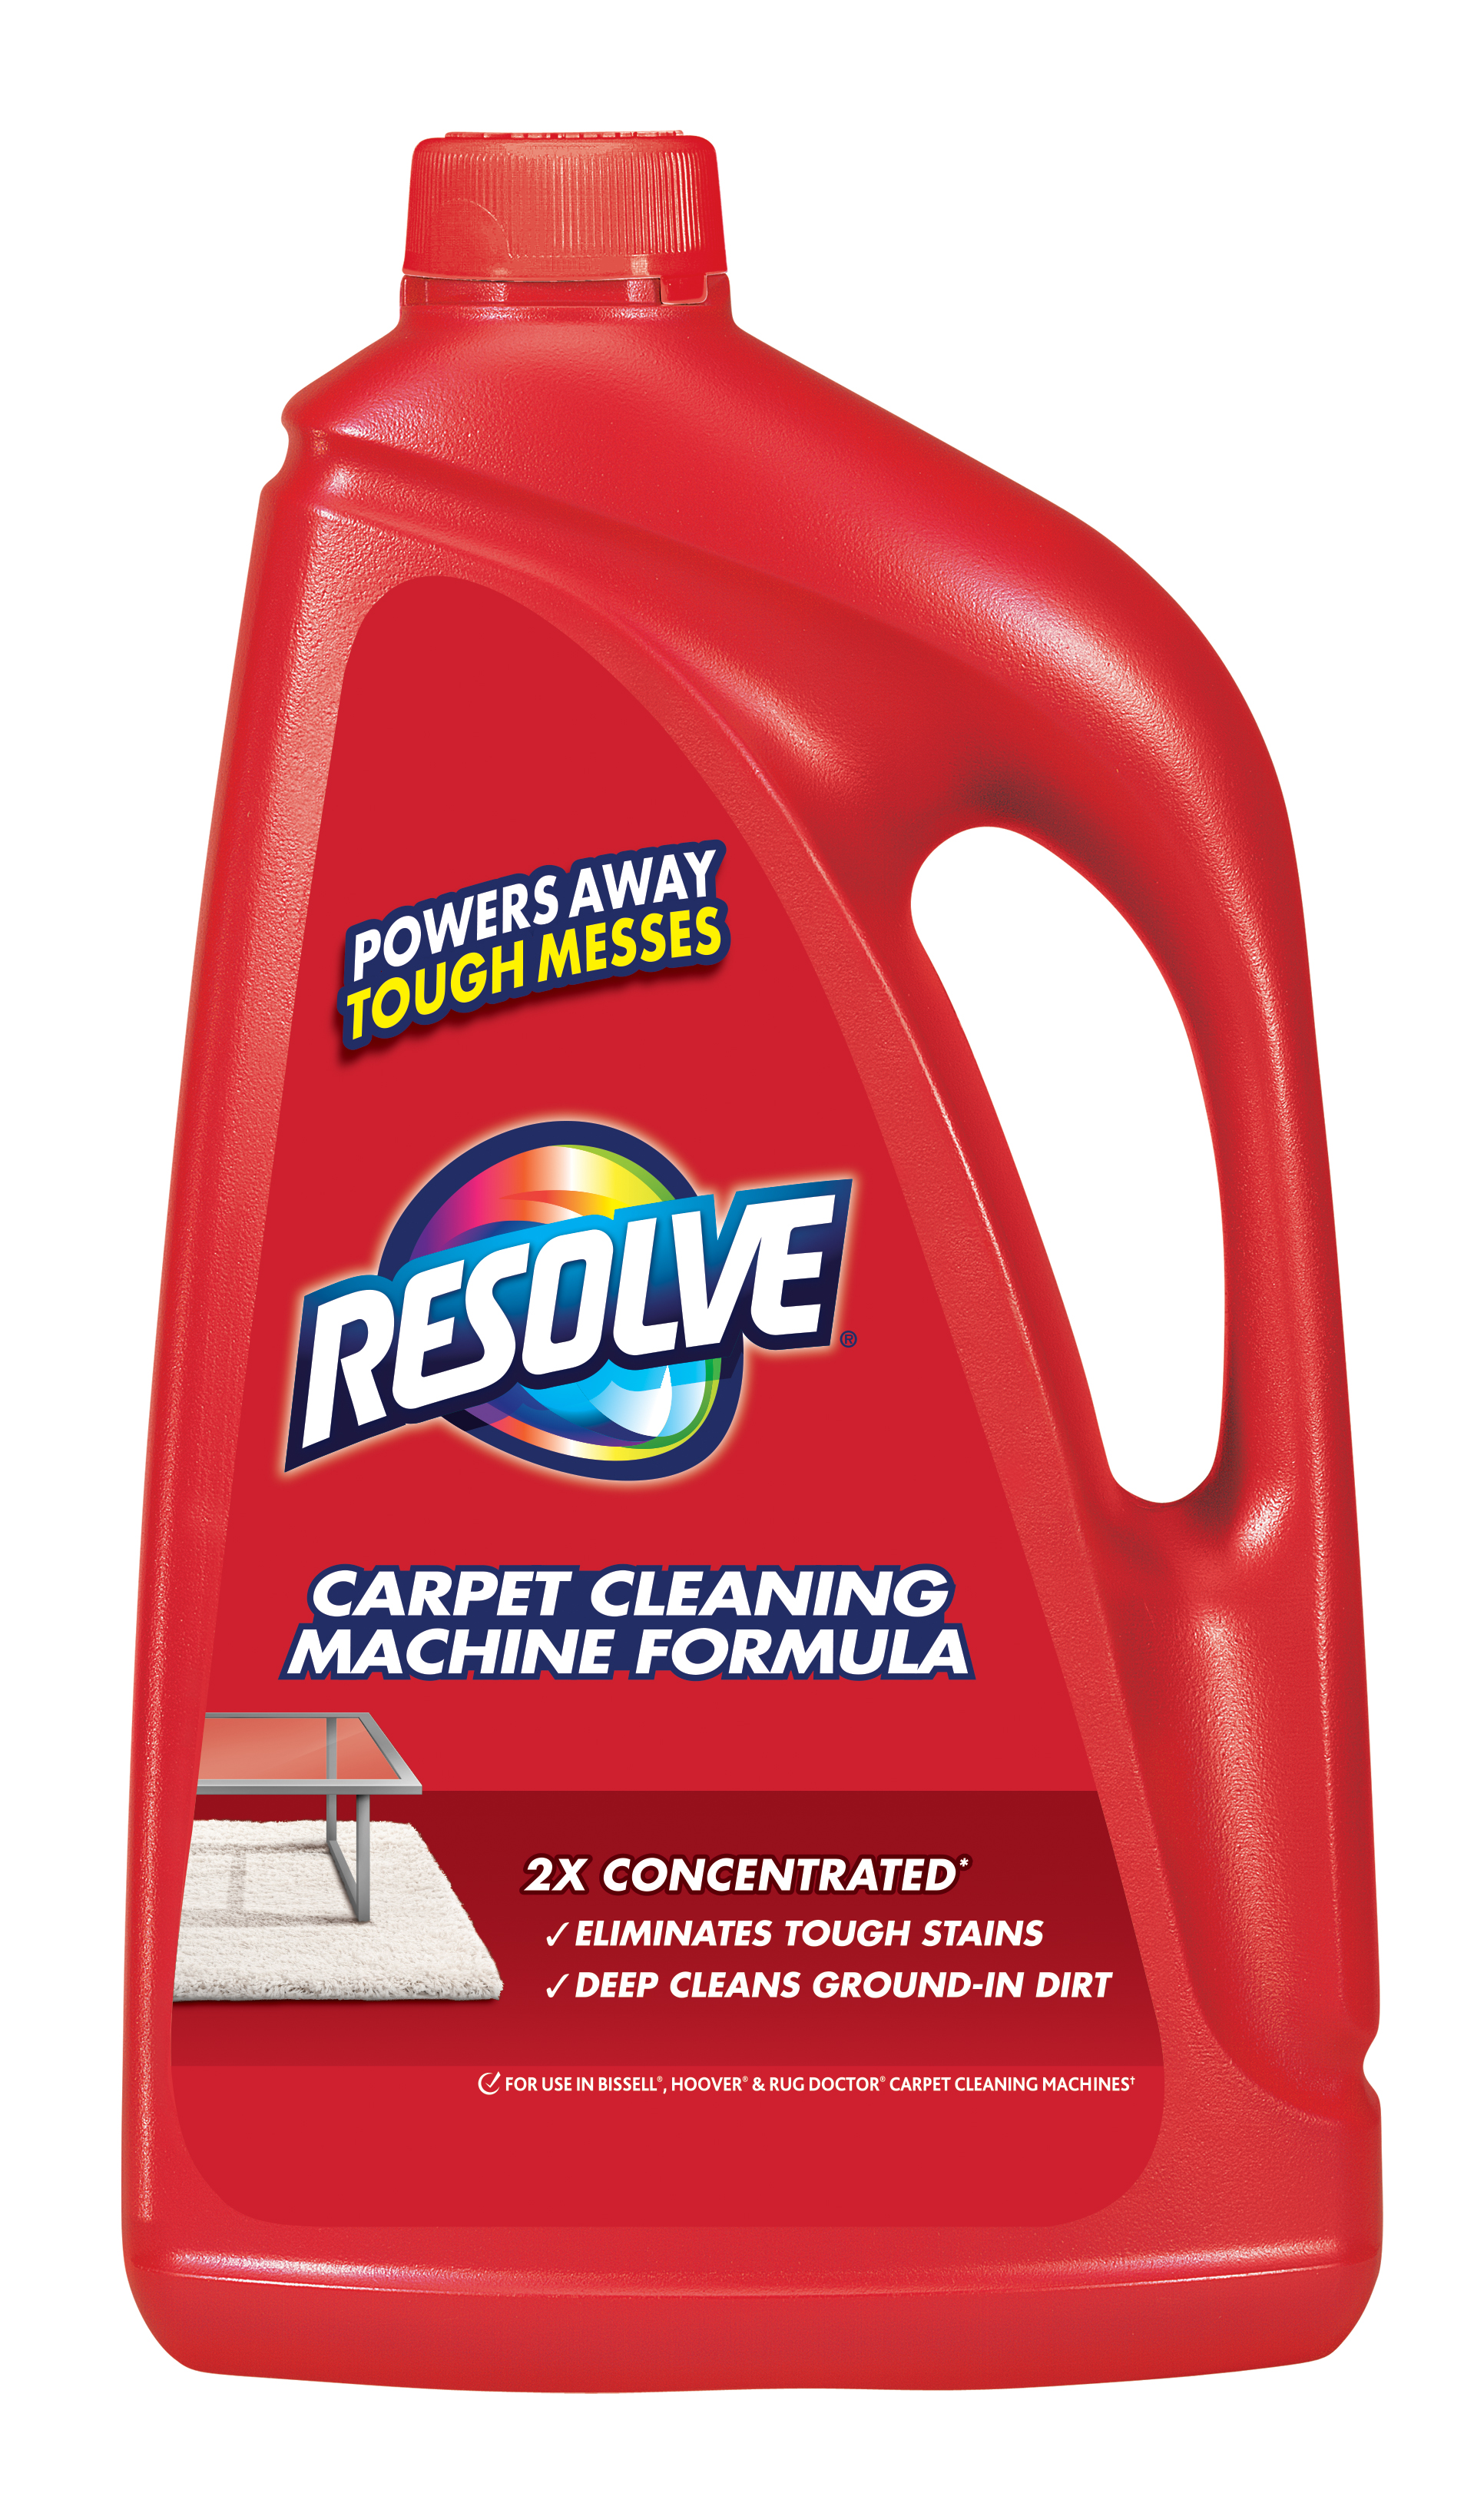 RESOLVE Carpet Cleaning Machine Formula 2X Concentrated